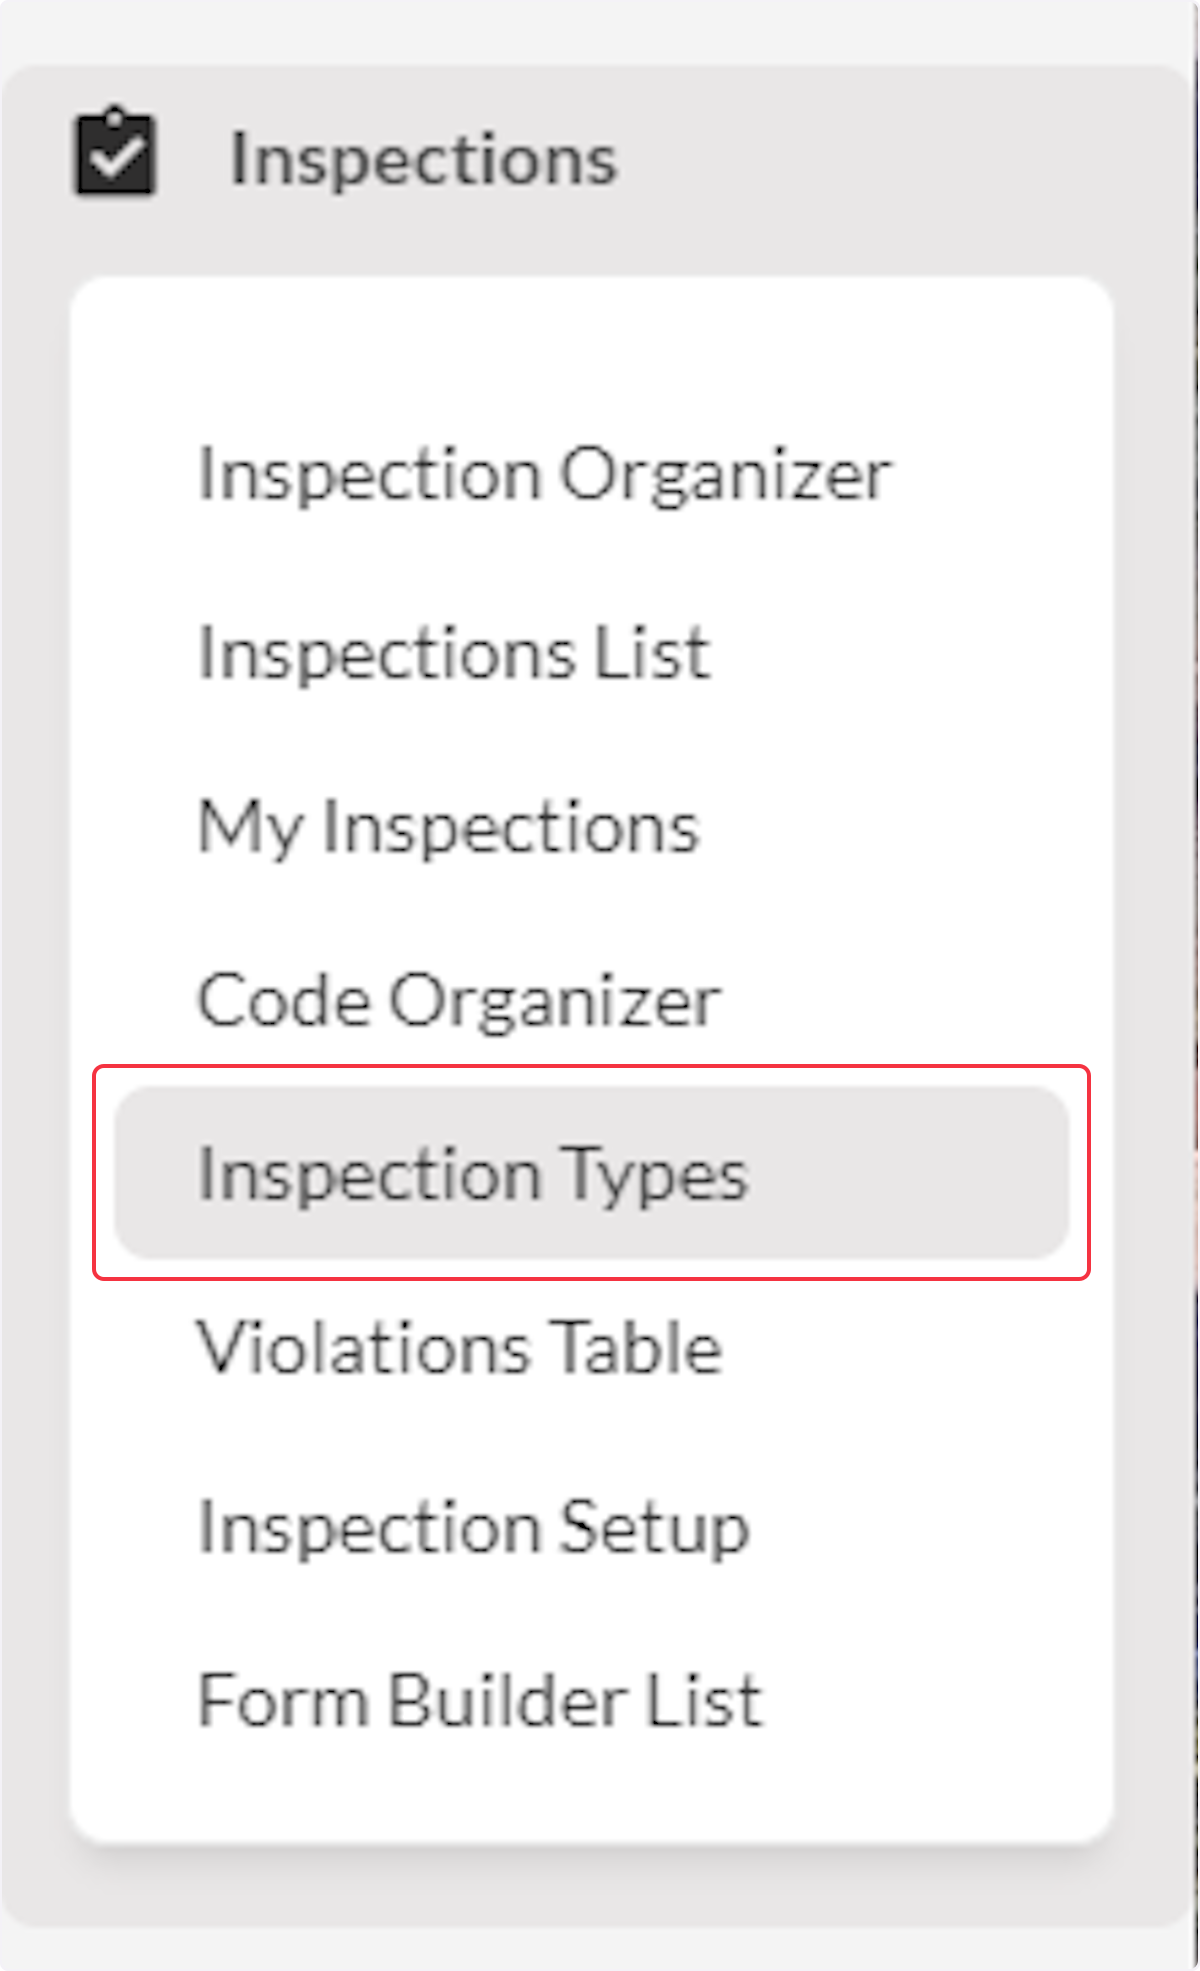 Click on Inspection Types.